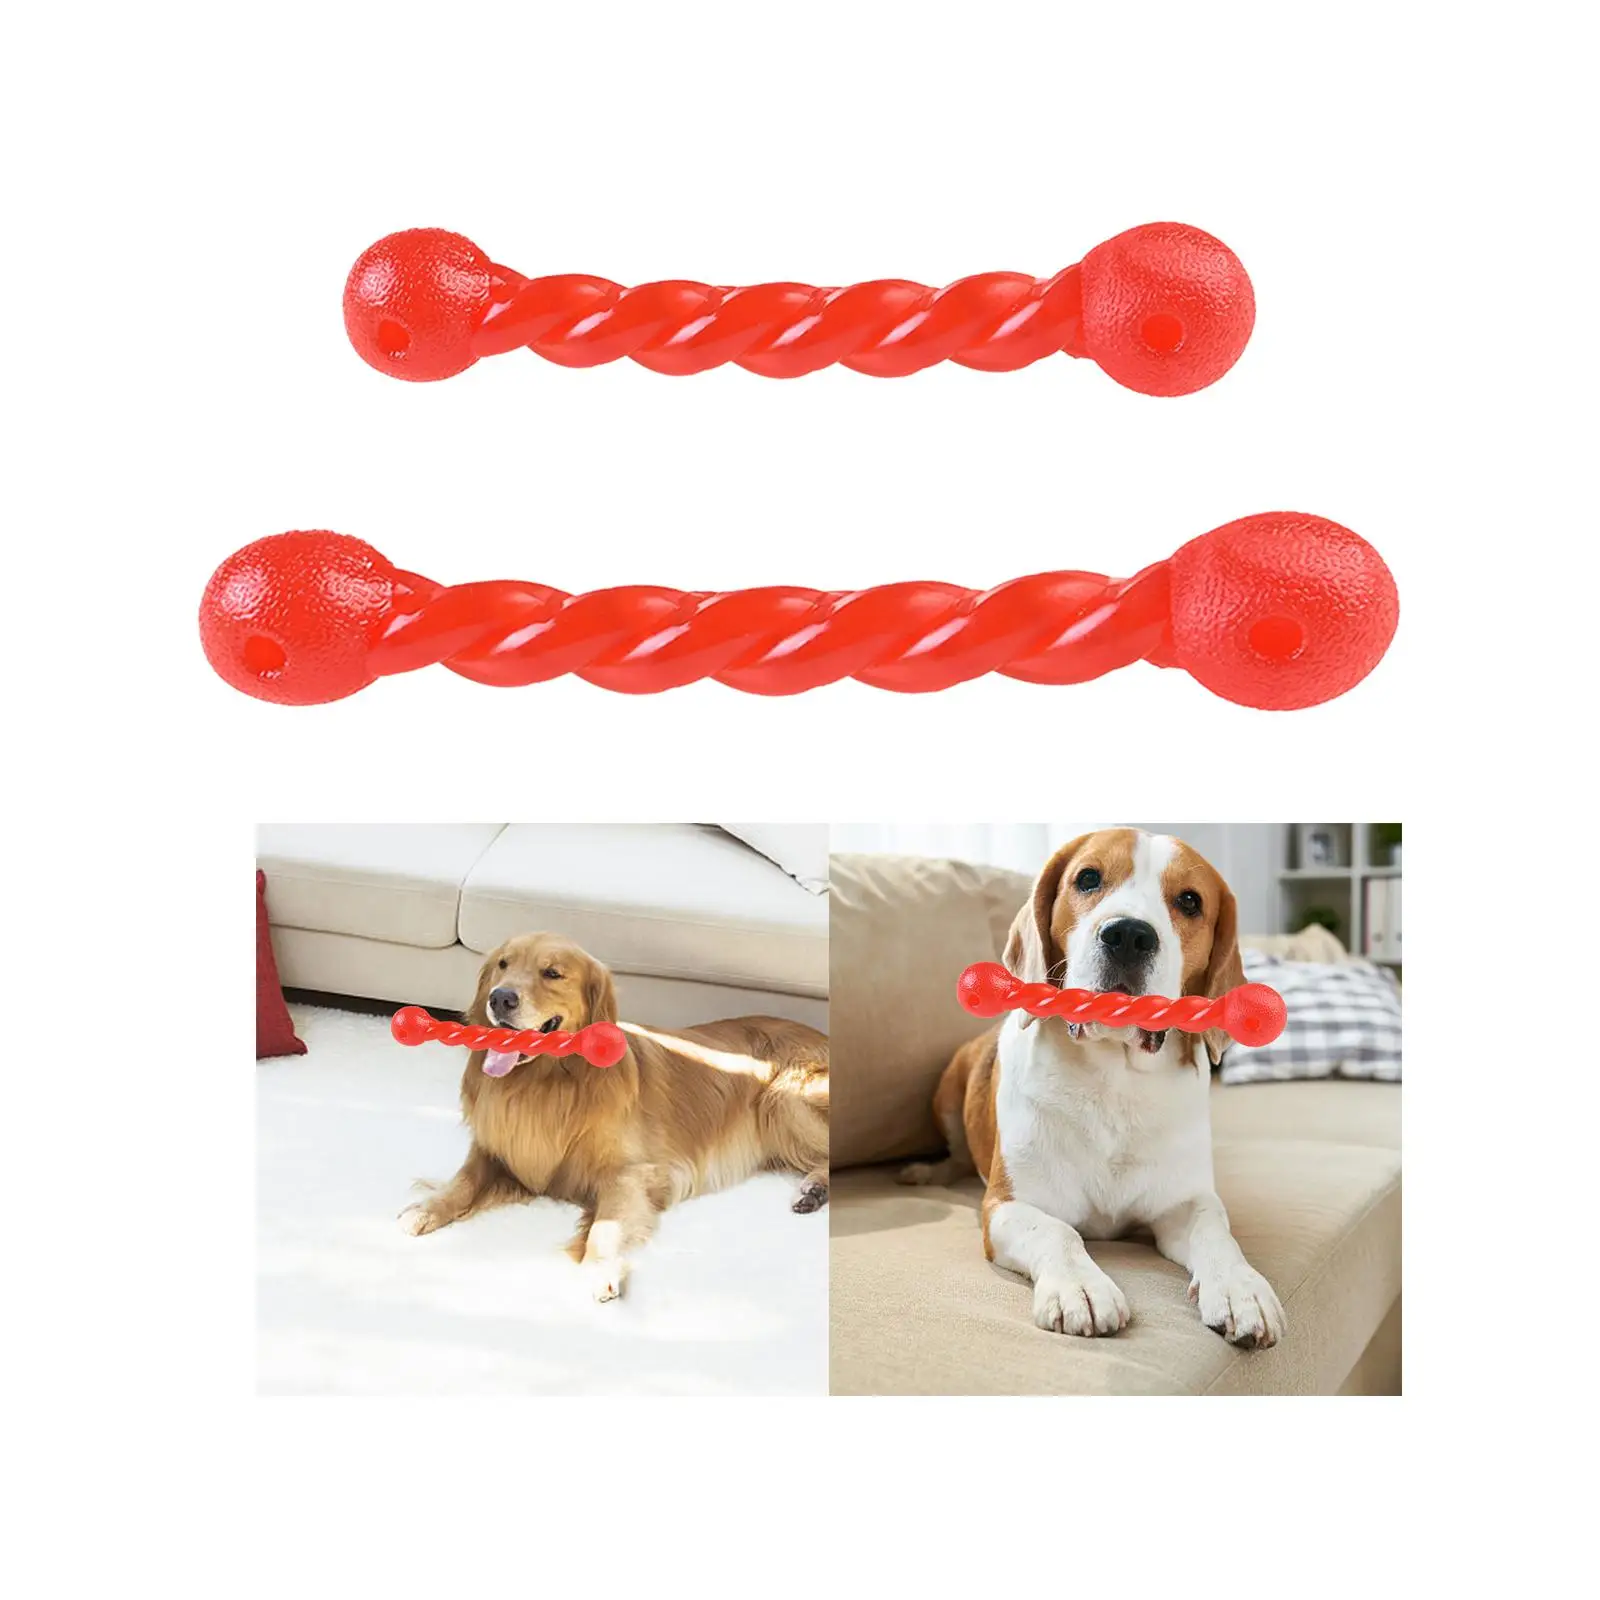 Dog Chew Toy Aggressive Chewers Interactive Rubber Bite Resistant Durable Soft